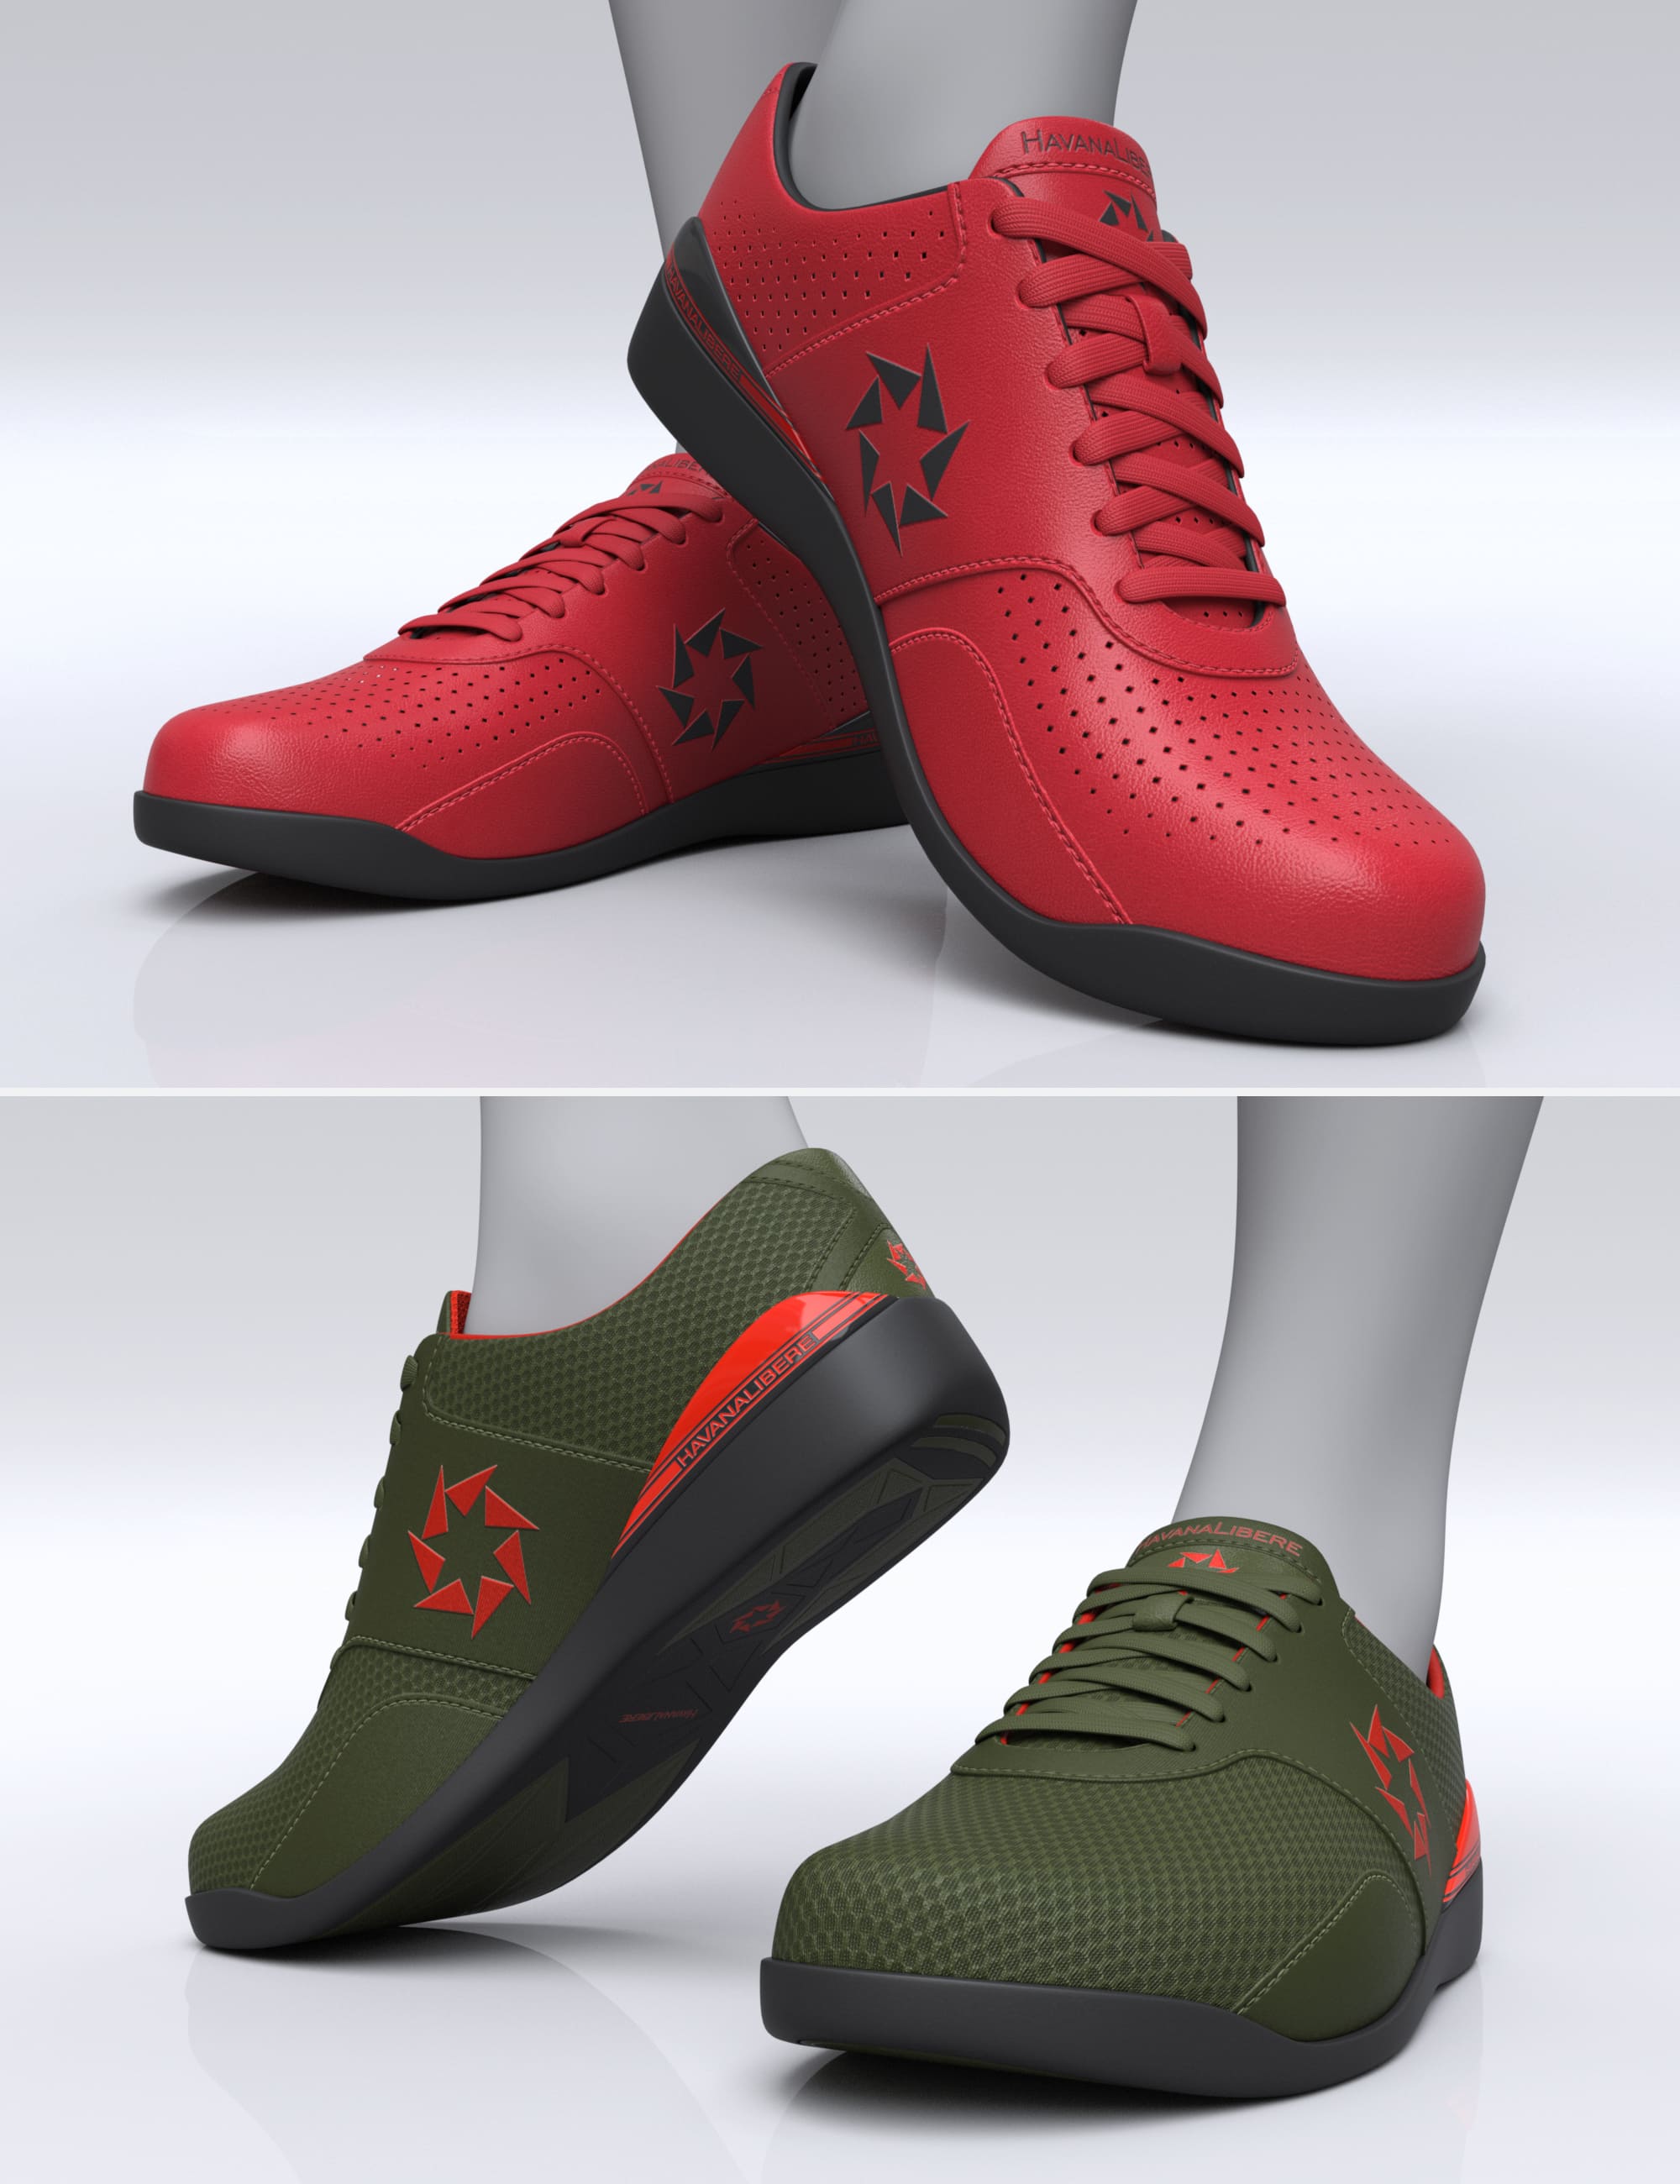 HL PD 550 Sneakers for Genesis 9, 8, and 8.1_DAZ3D下载站